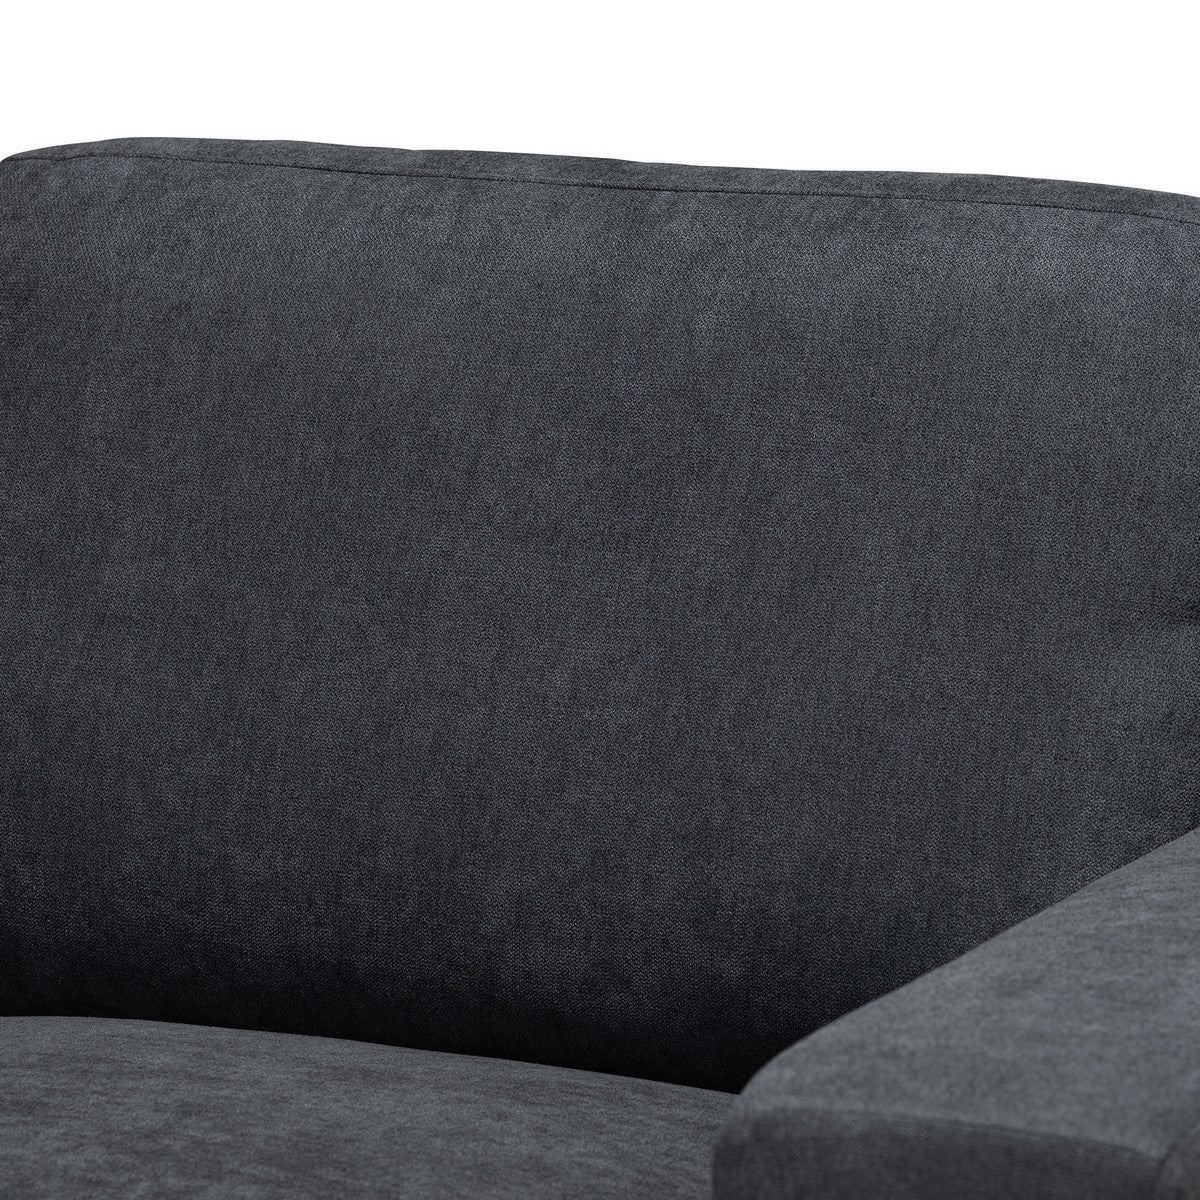 Baxton Studio Nevin Modern and Contemporary Dark Grey Fabric Upholstered Sectional Sofa with Left Facing Chaise